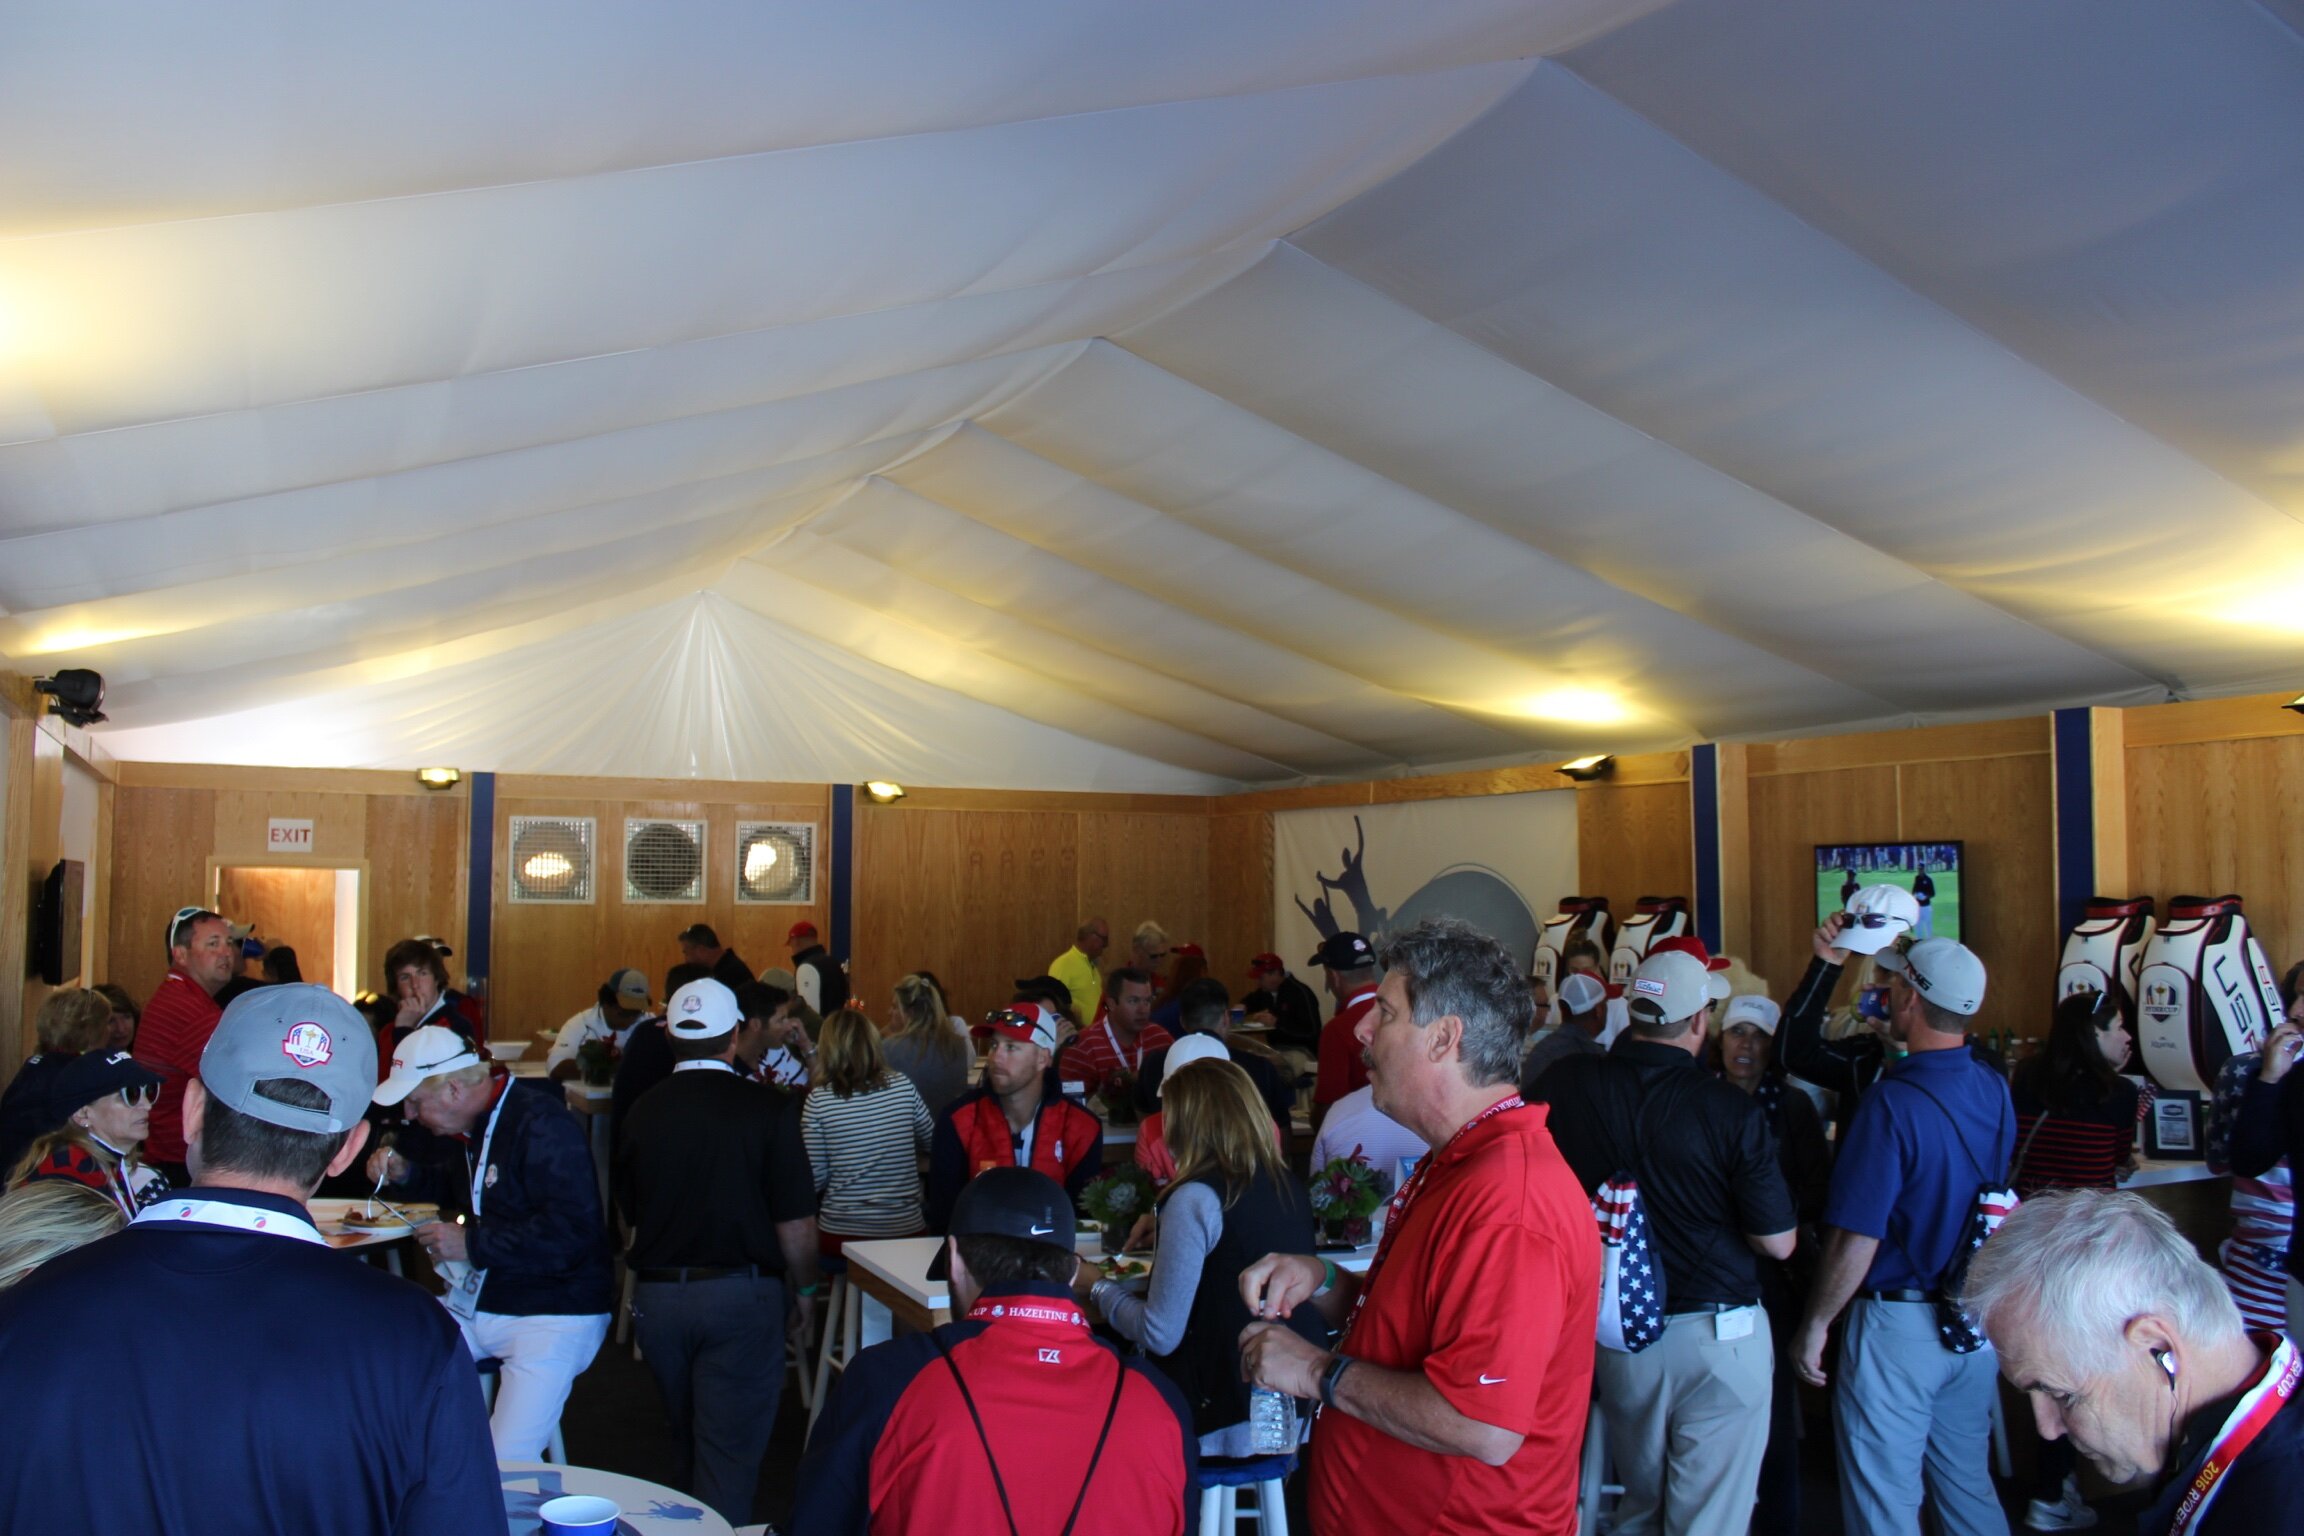 Hospitality management at the 2016 Ryder Cup